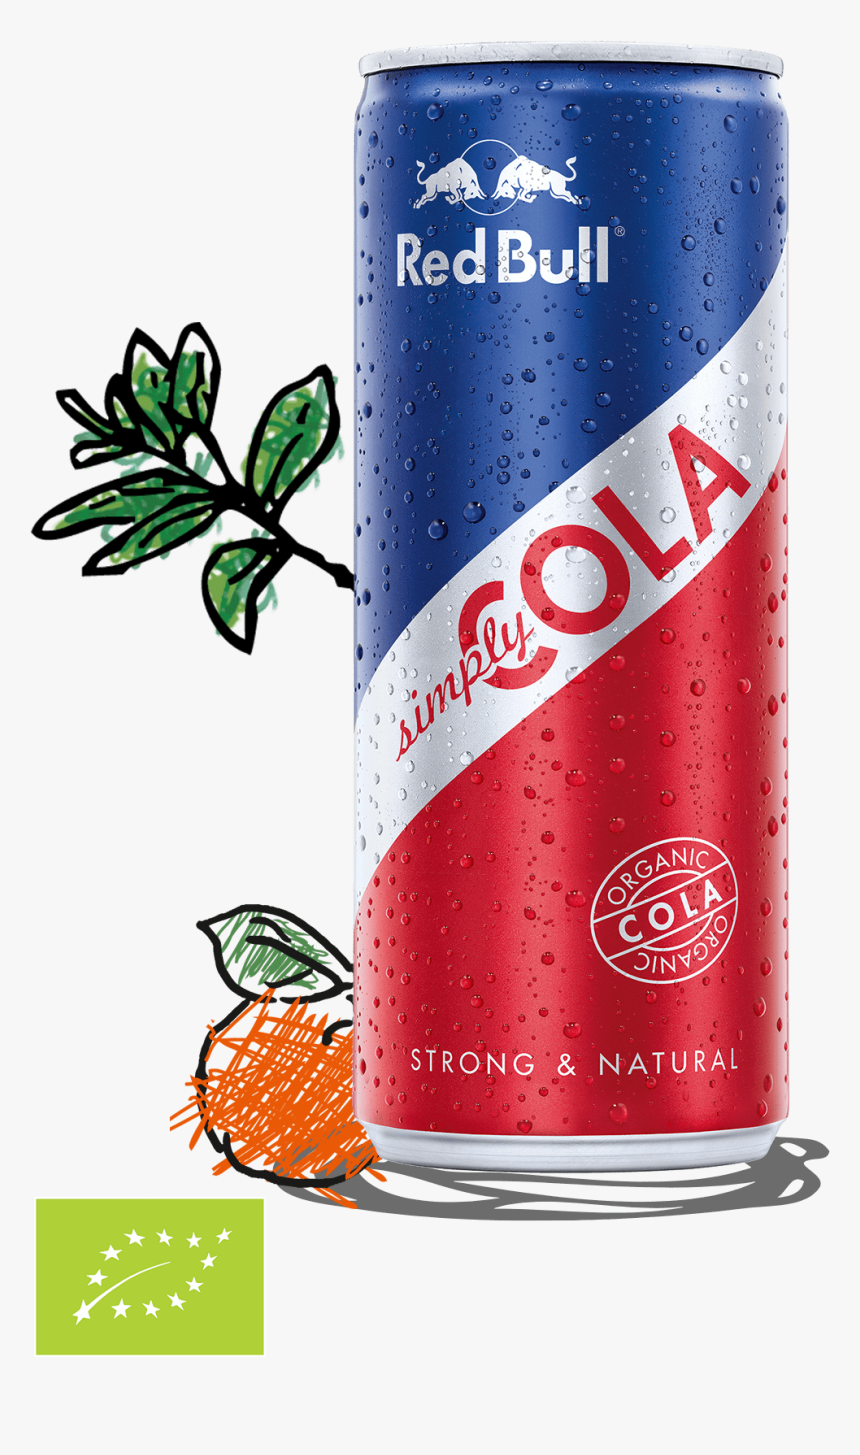 Coca-cola Bottle Png - Red Bull Cola Energy Drink, Transparent Png, Free Download